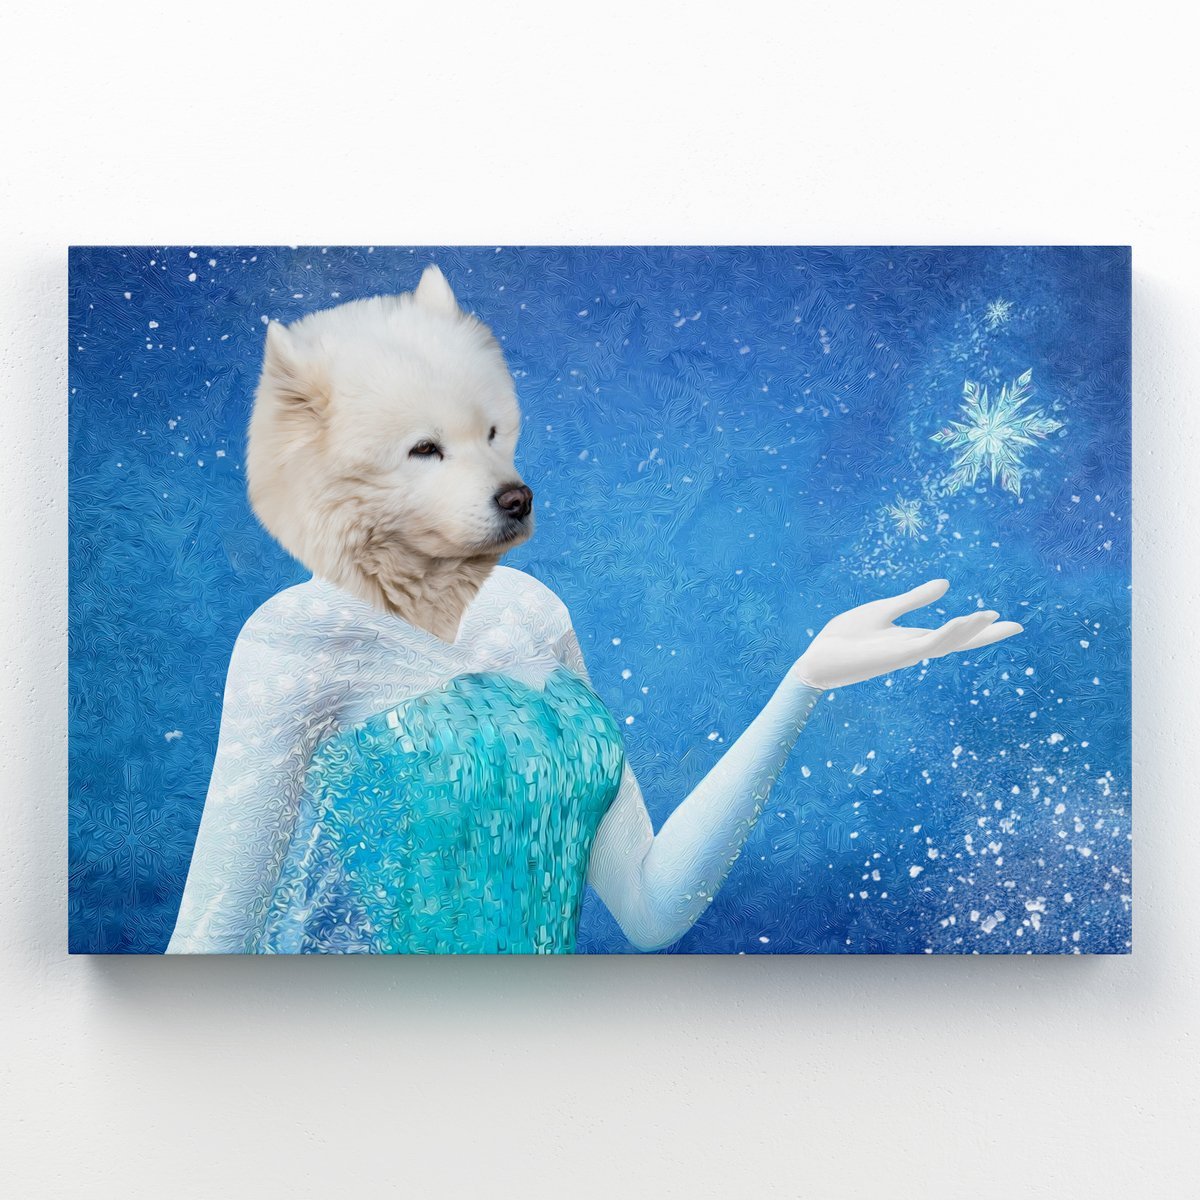 Elsa (Frozen Inspired): Custom Pet Canvas - Paw & Glory - #pet portraits# - #dog portraits# - #pet portraits uk#paw & glory, pet portraits canvas,custom pet canvas prints, dog pictures on canvas, dog canvas art custom, personalised cat canvas, dog wall art canvas